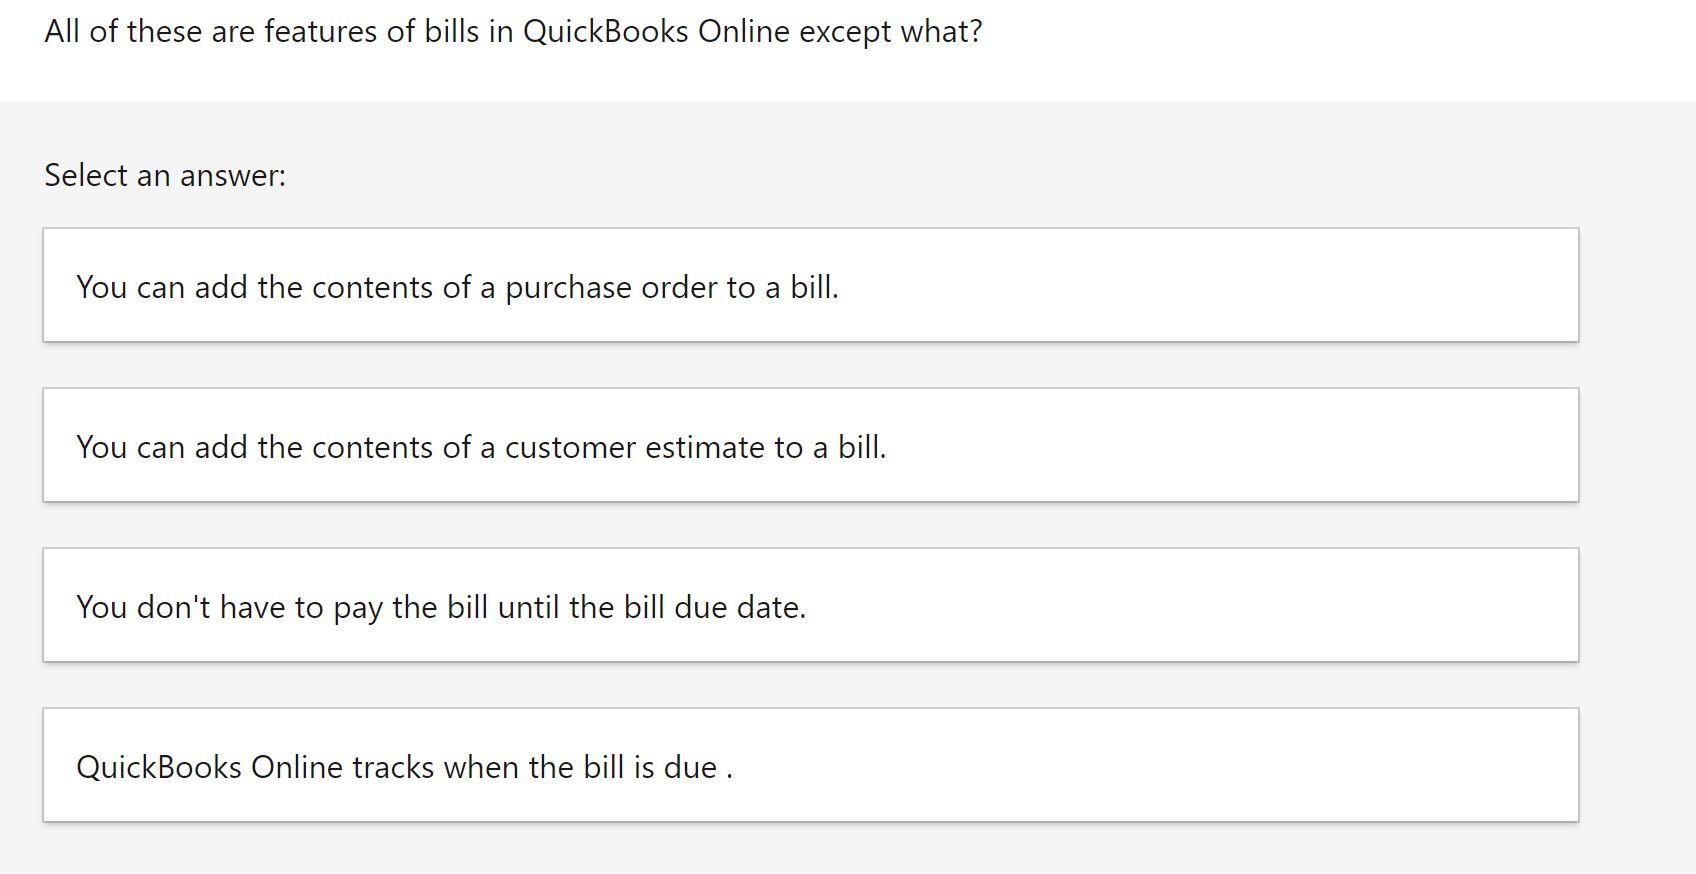 All of these are features of bills in QuickBooks Online except what? Select an answer: You can add the